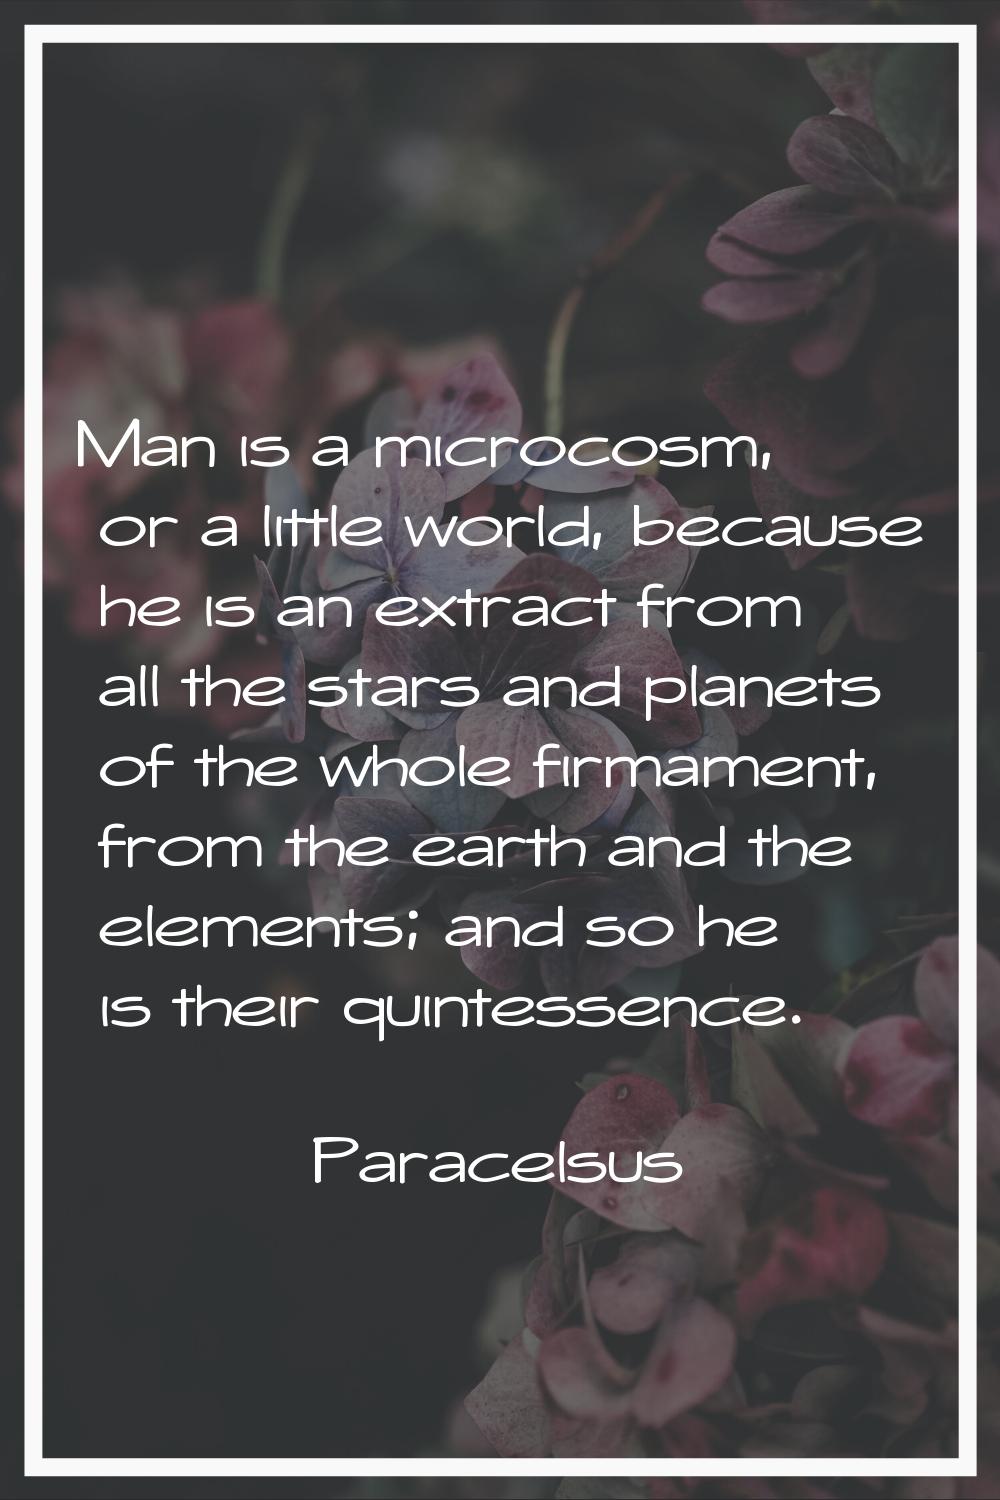 Man is a microcosm, or a little world, because he is an extract from all the stars and planets of t